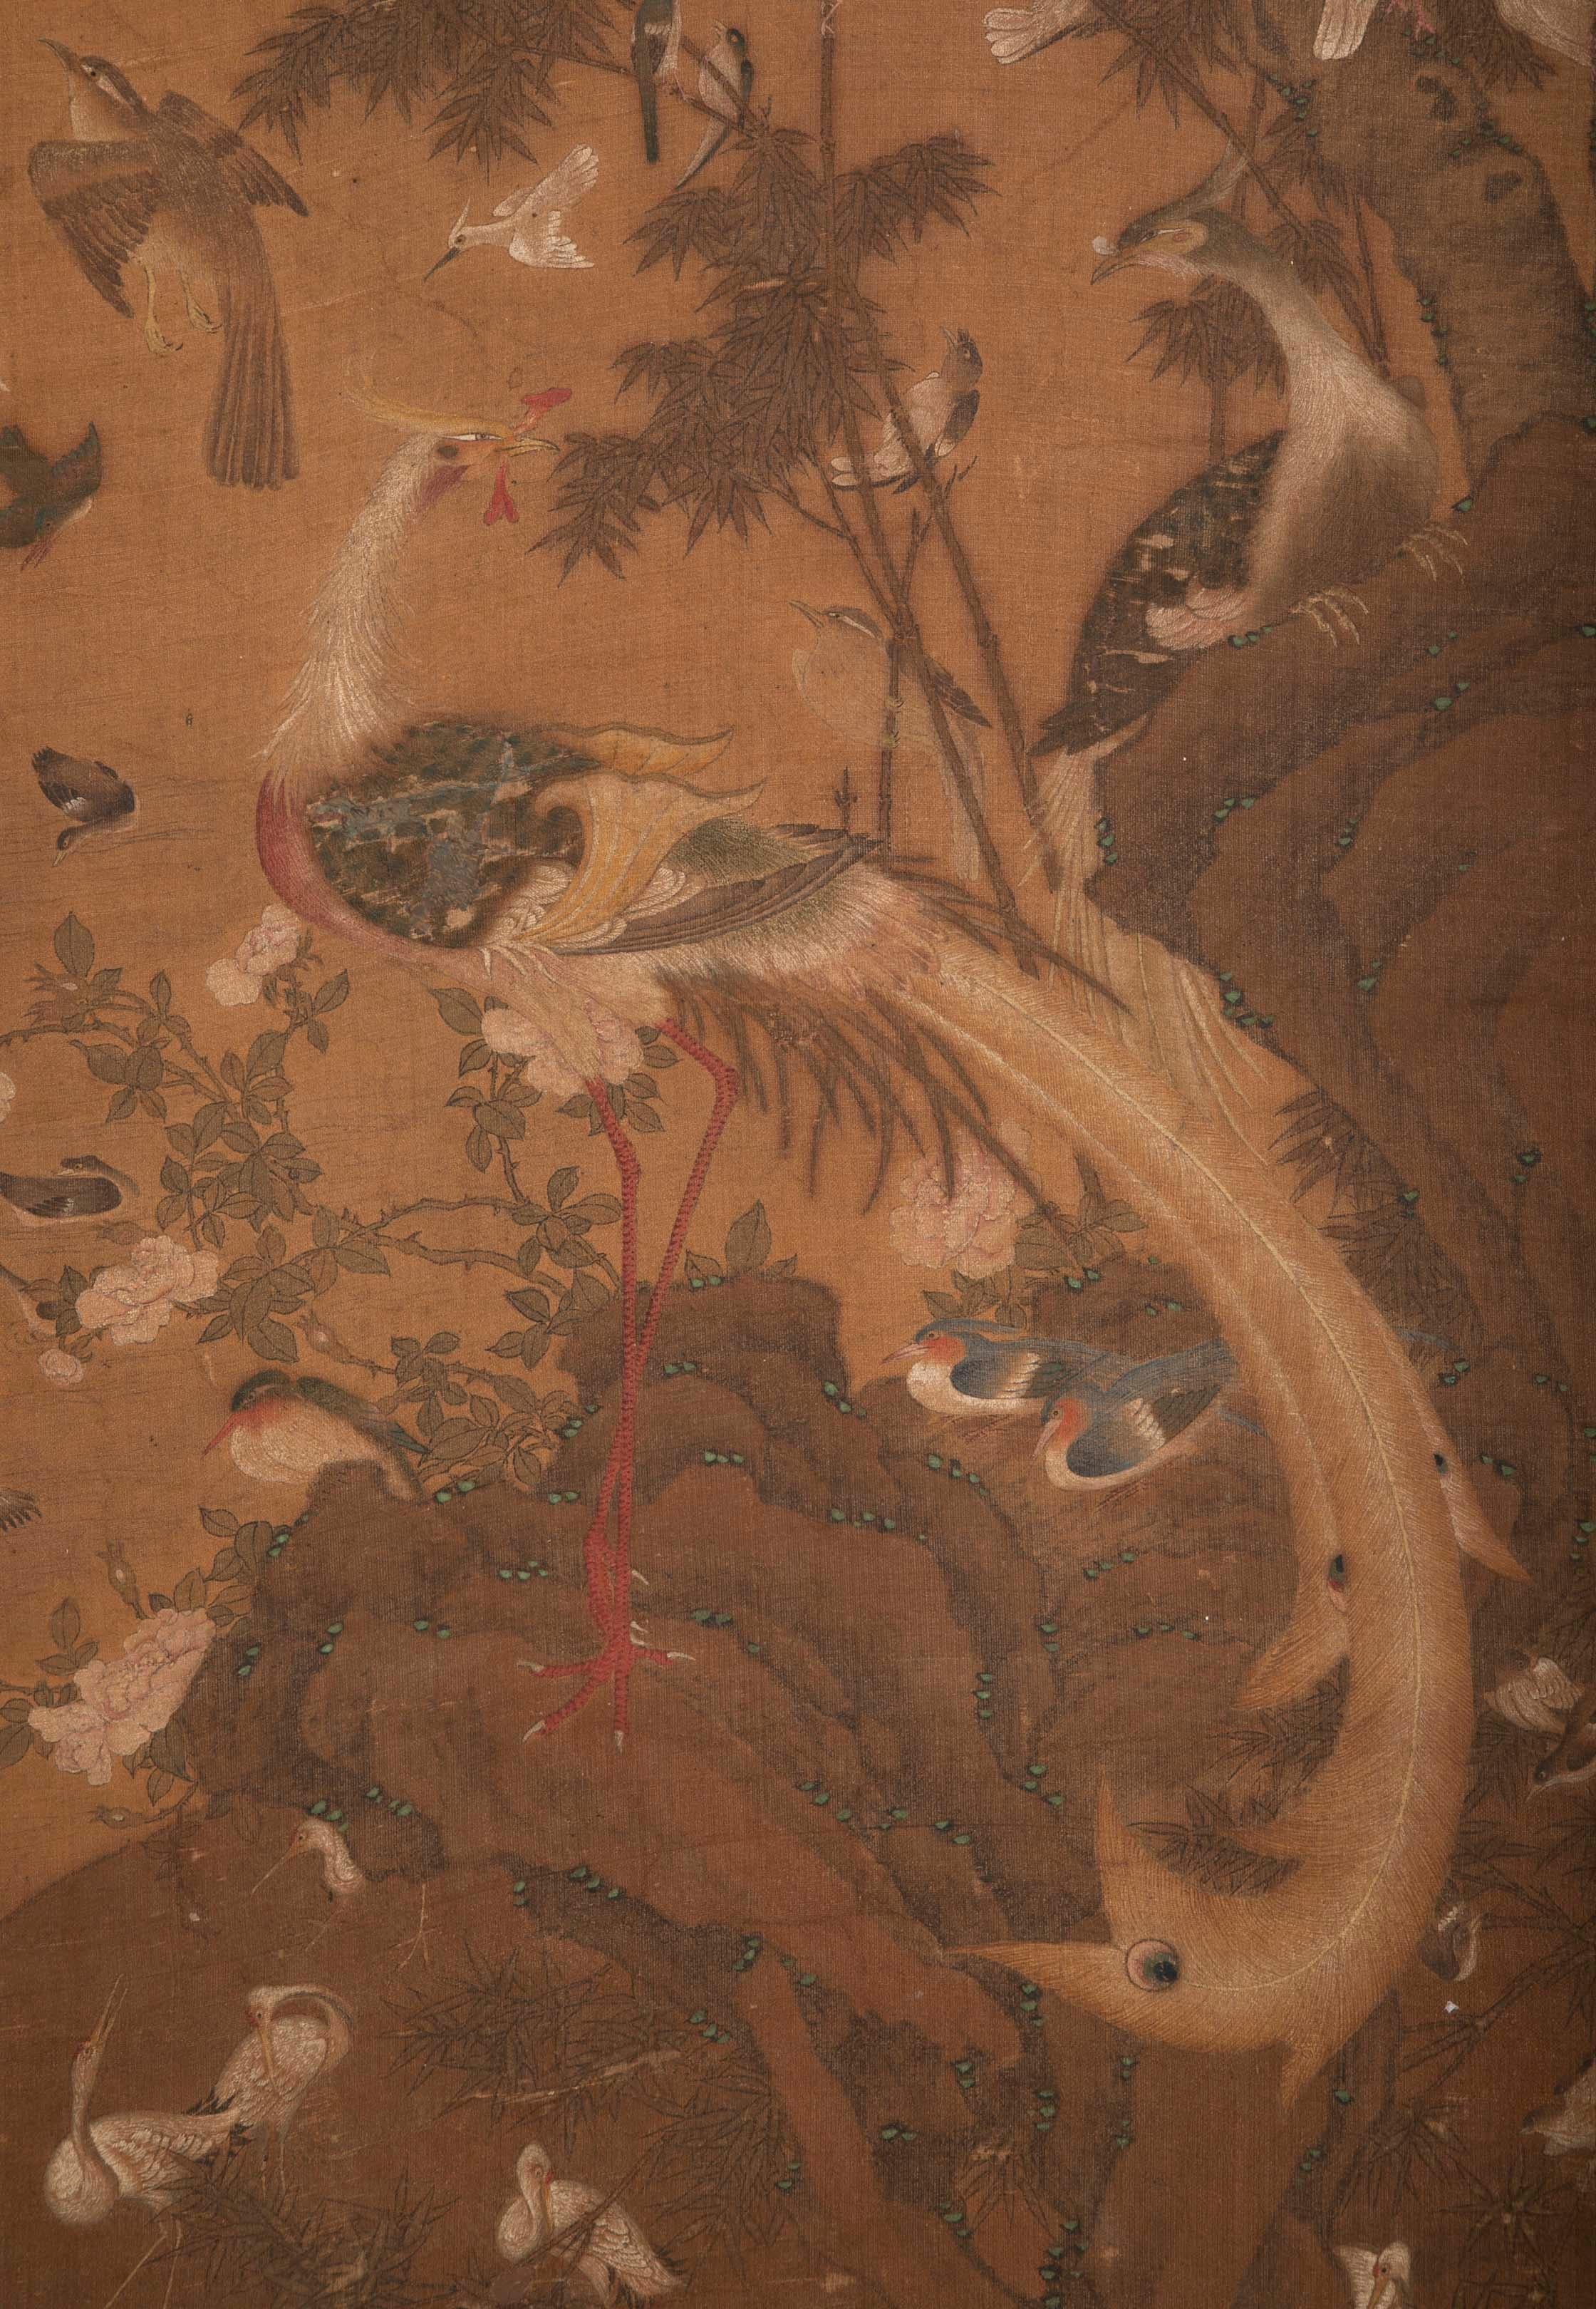 Painted 19th Century Framed Chinese Scroll Depicting the Scene of a Hundred Birds